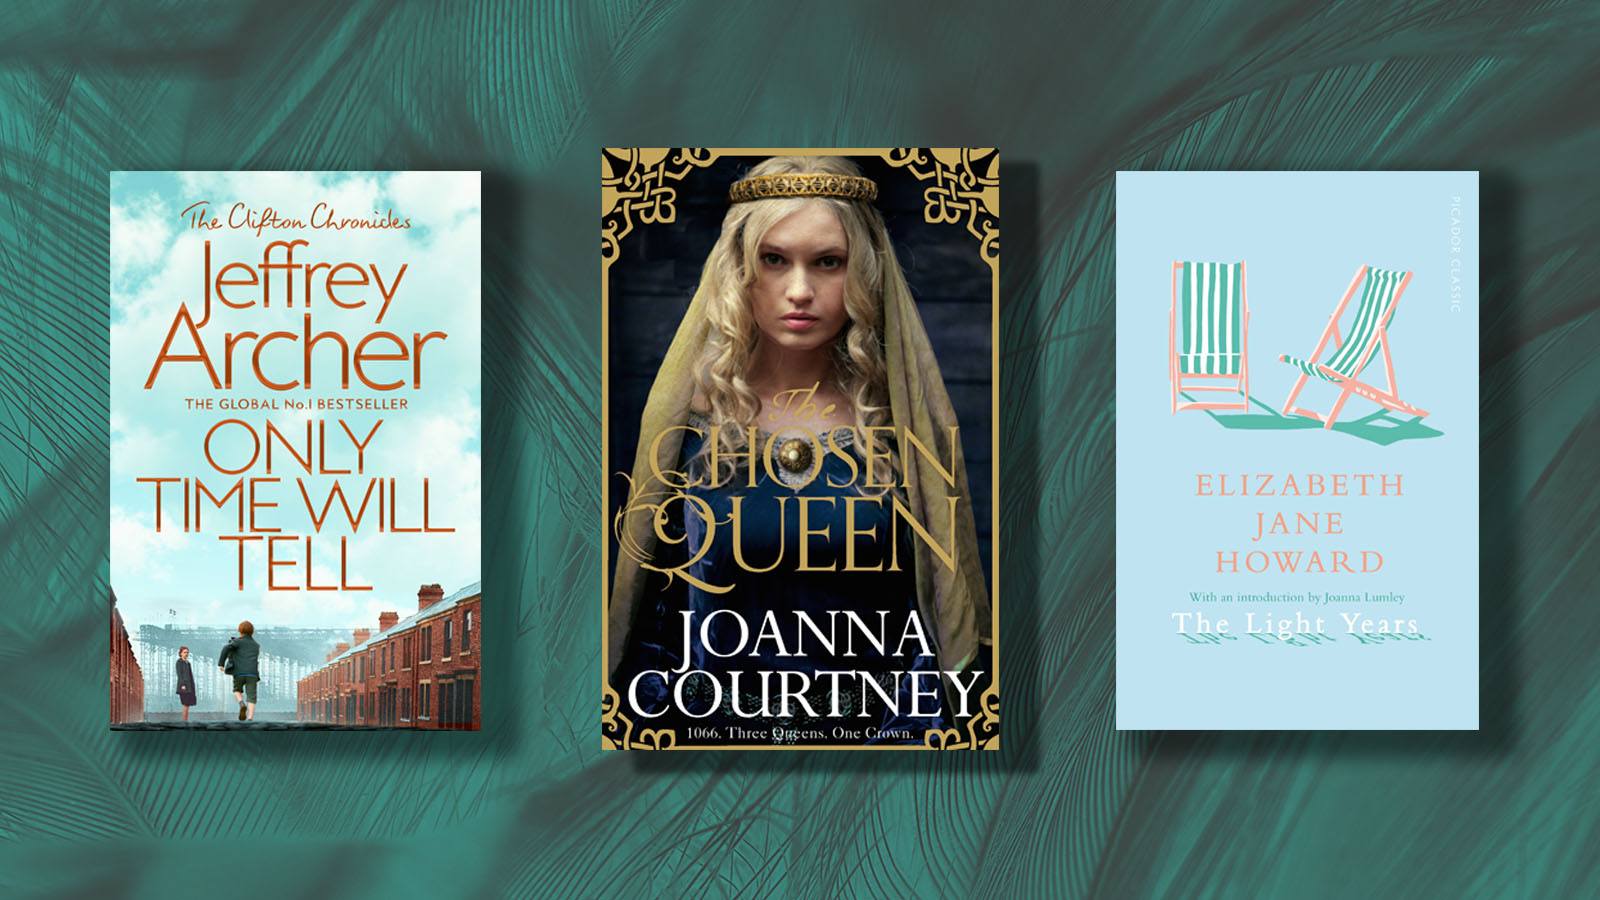 Only Time Will Tell by Jeffrey Archer, Chosen Queen by Joanna Courtney and The Light Years by Elizabeth Jane Howard on a green background.